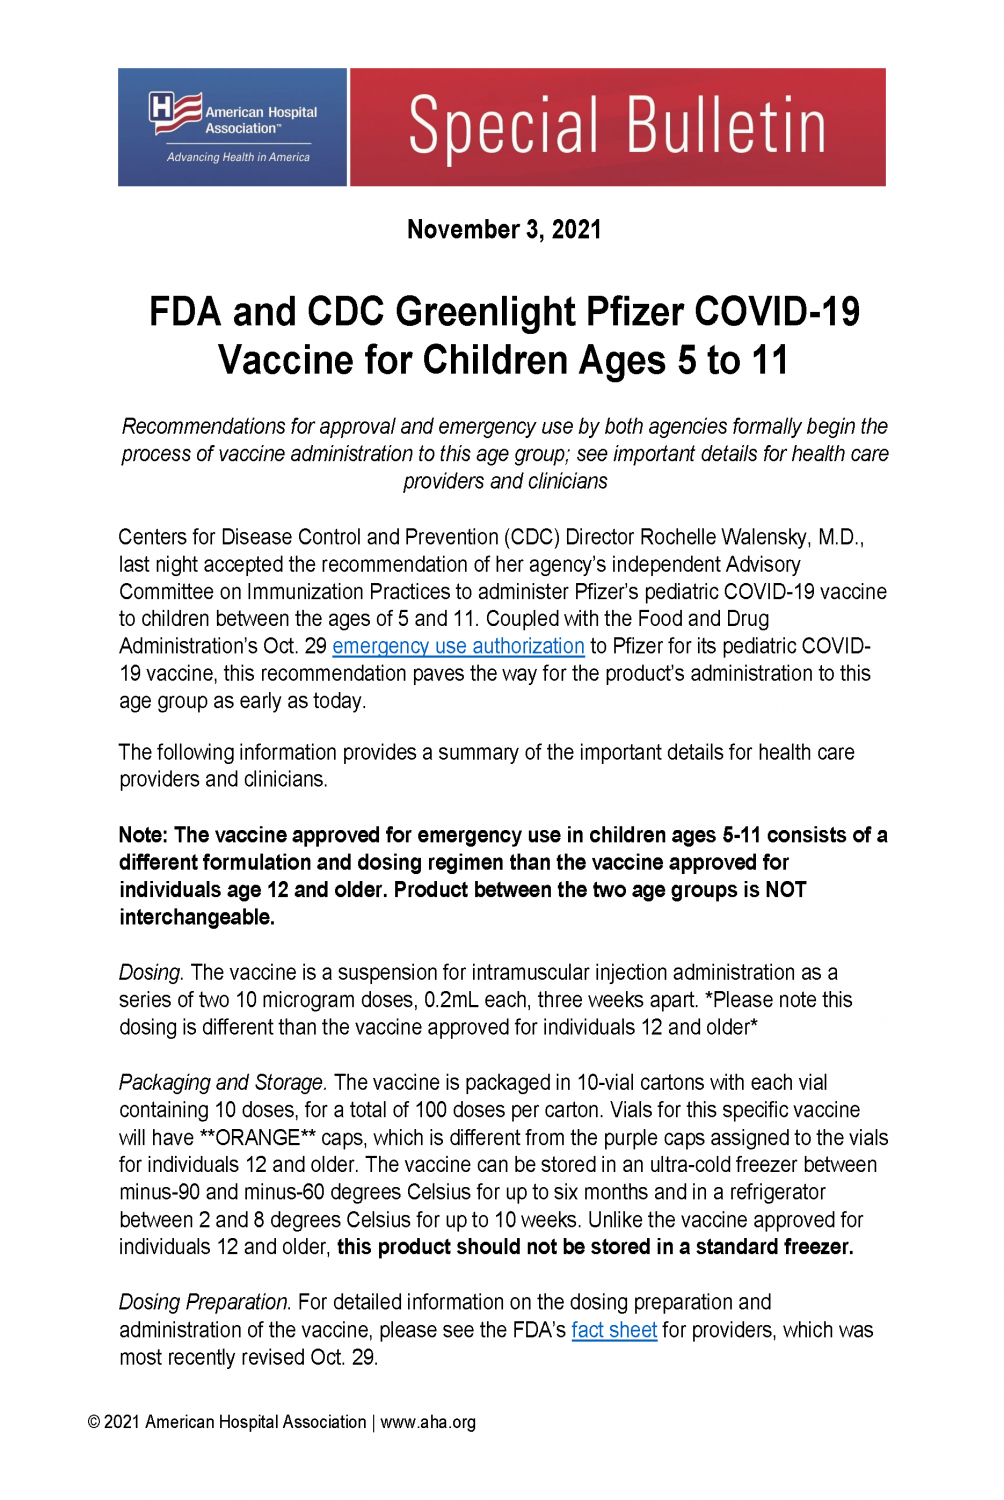 Special Bulletin: FDA and CDC Greenlight Pfizer COVID-19 Vaccine for Children Ages 5 to 11. November 3, 2021. Page 1.